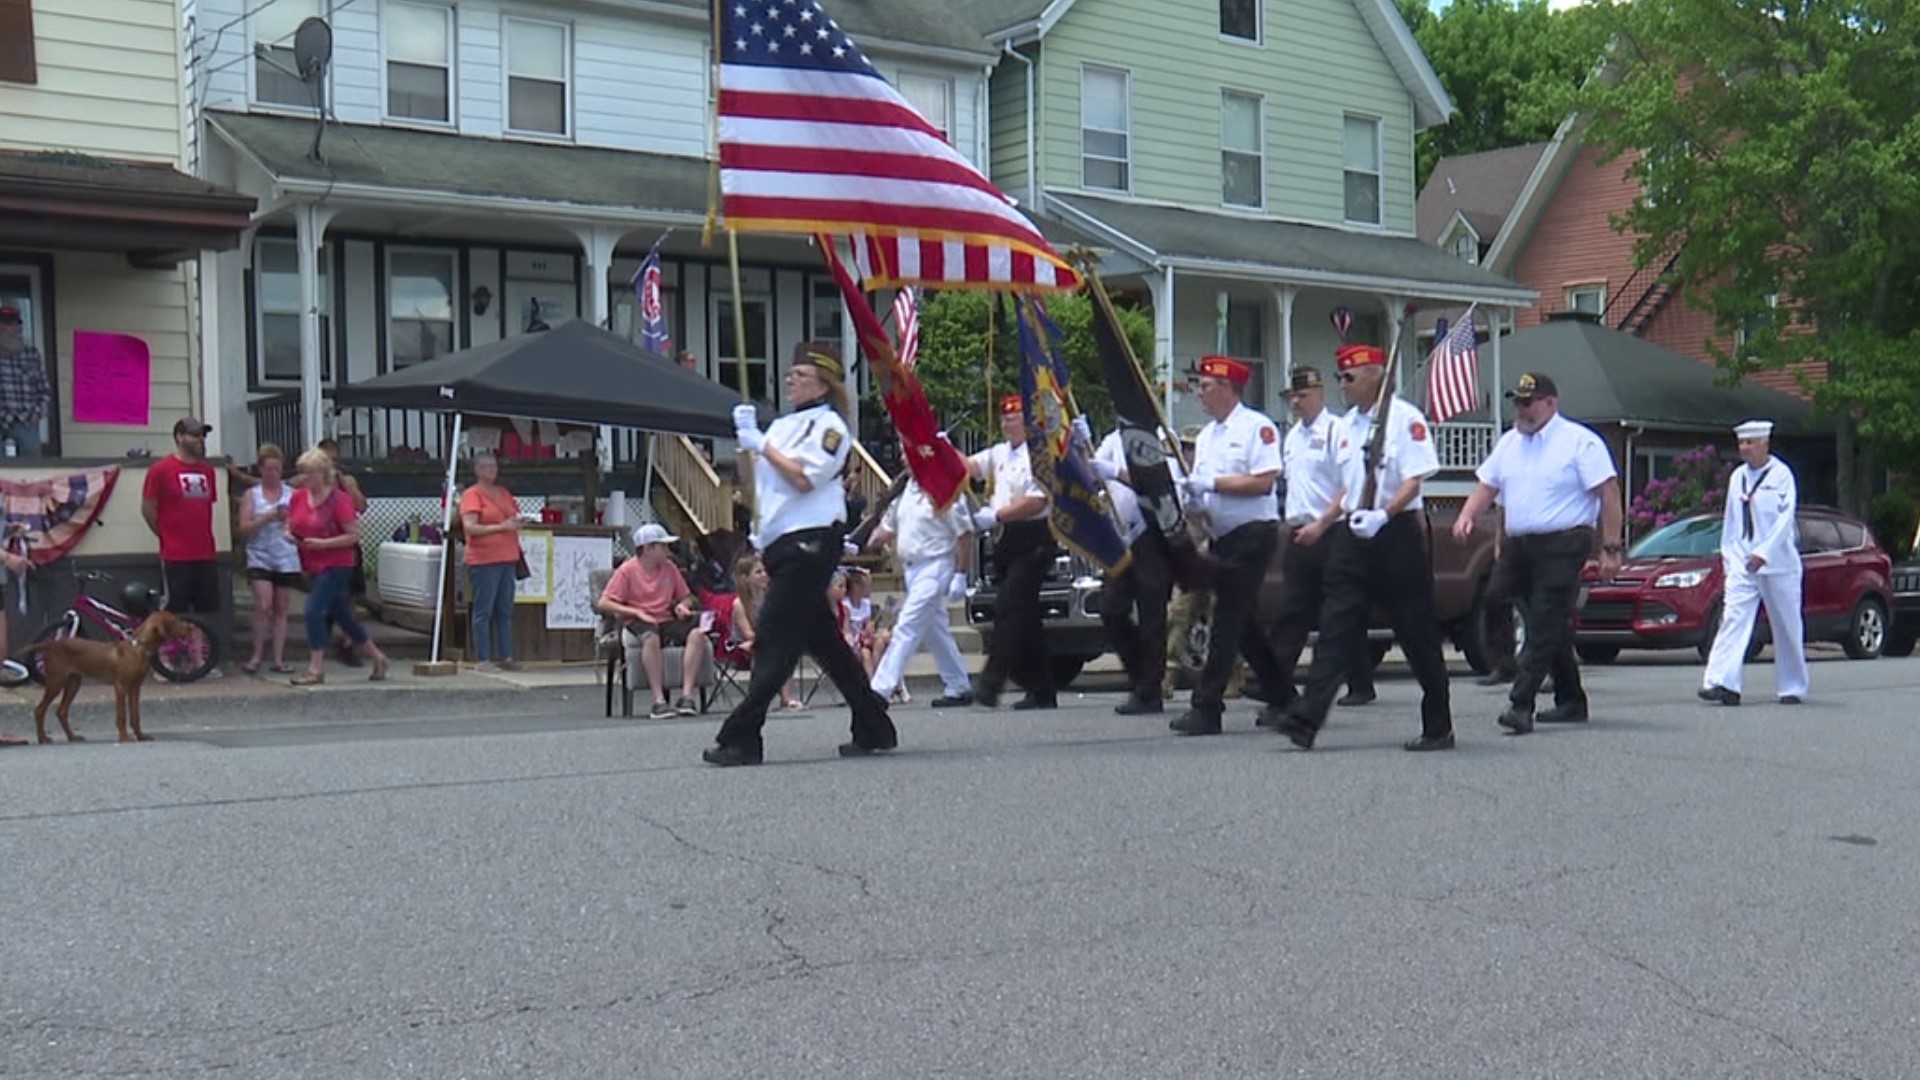 The annual White Haven Memorial Day Parade kicked off along Lehigh Park from 1 p.m. to 4 p.m. Sunday.